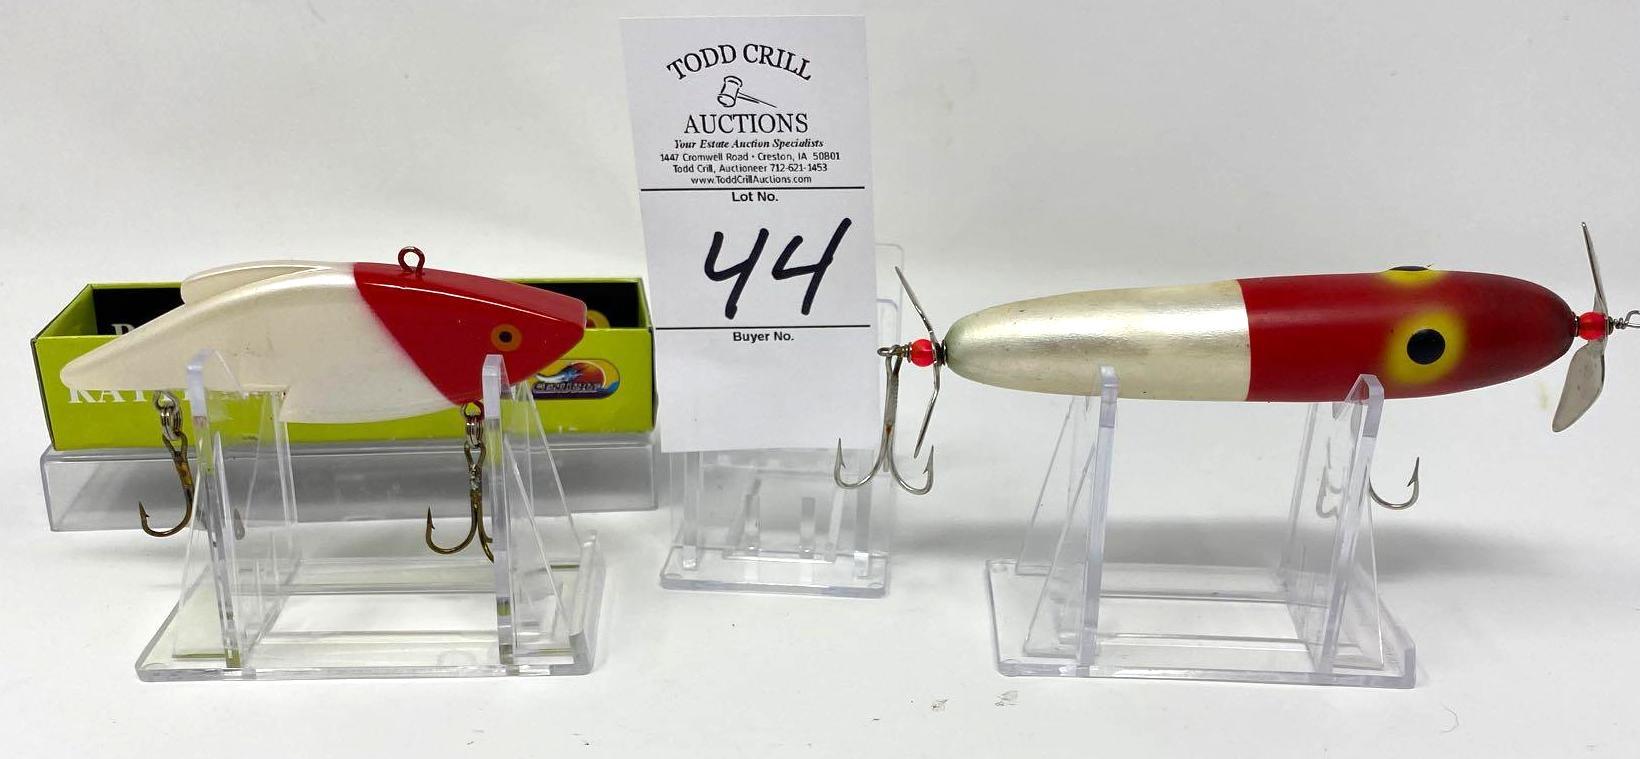 Two Vintage Fishing Lures